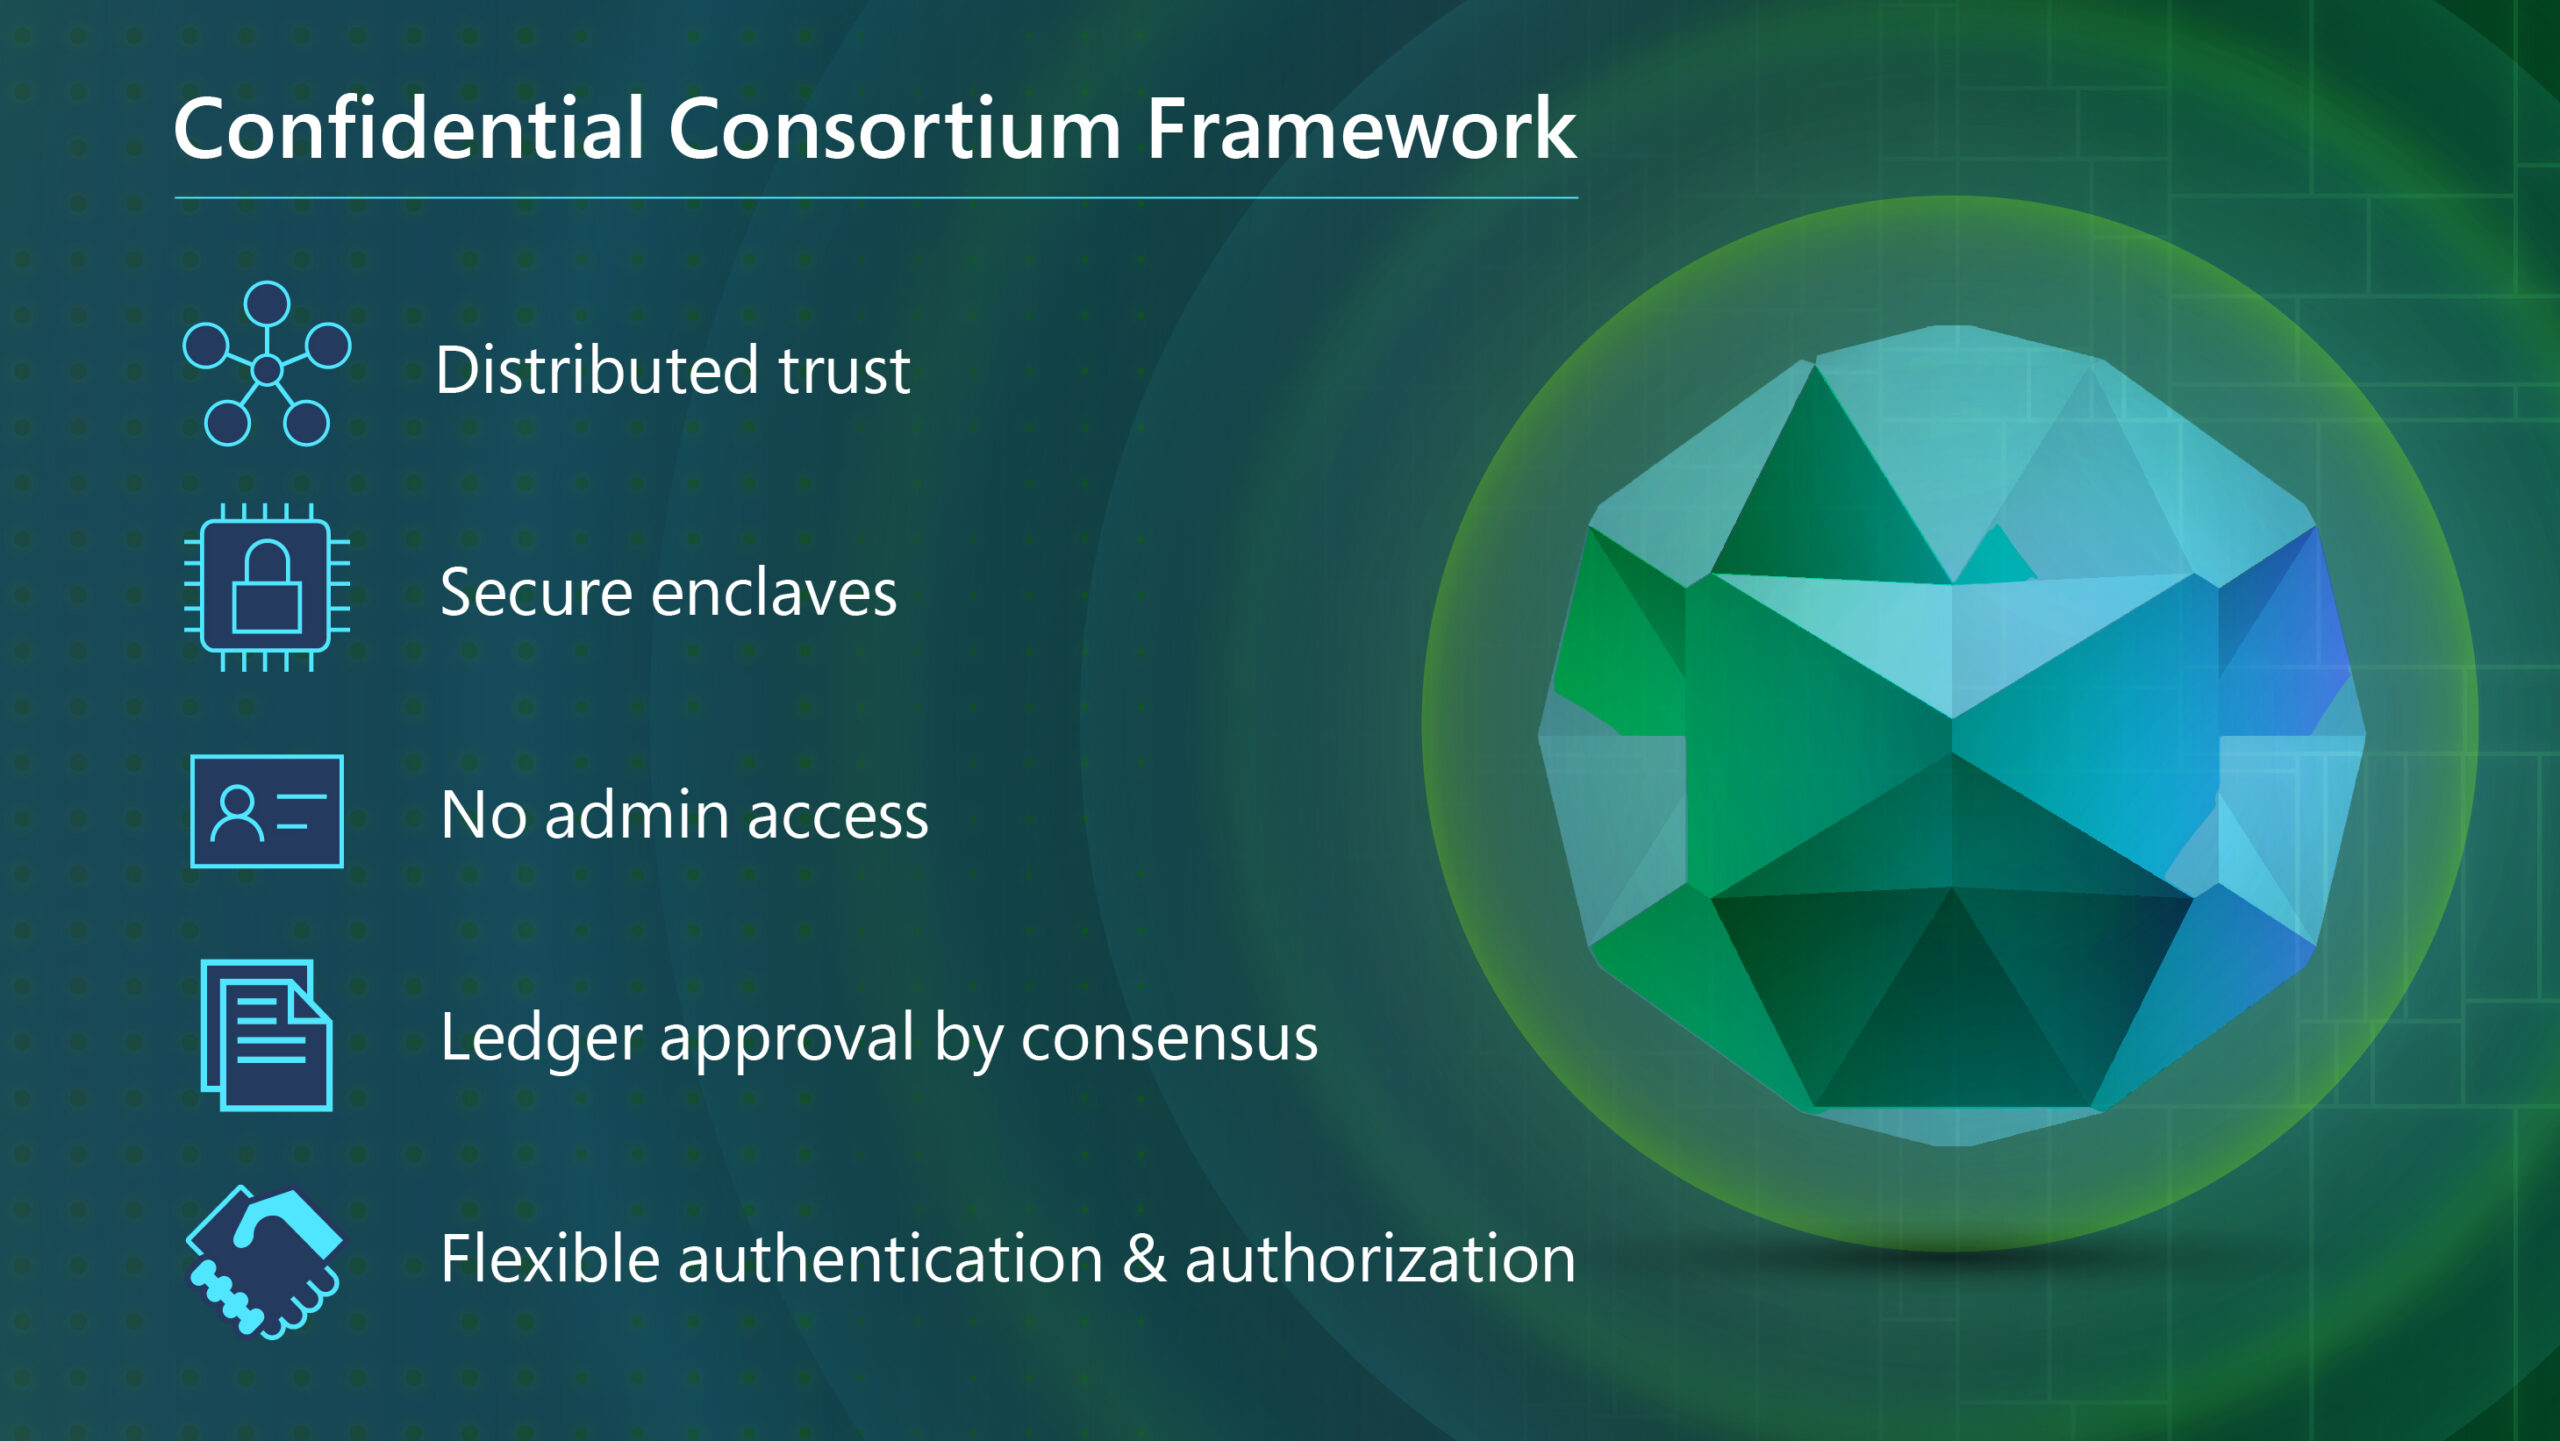 A list of bullet points describing key features of Confidential Consortium Framework: distributed trust, secure enclaves, no admin access, ledger approval by consensus, and flexible authentication and authorization. Next to them is a green and blue geometric sphere. 